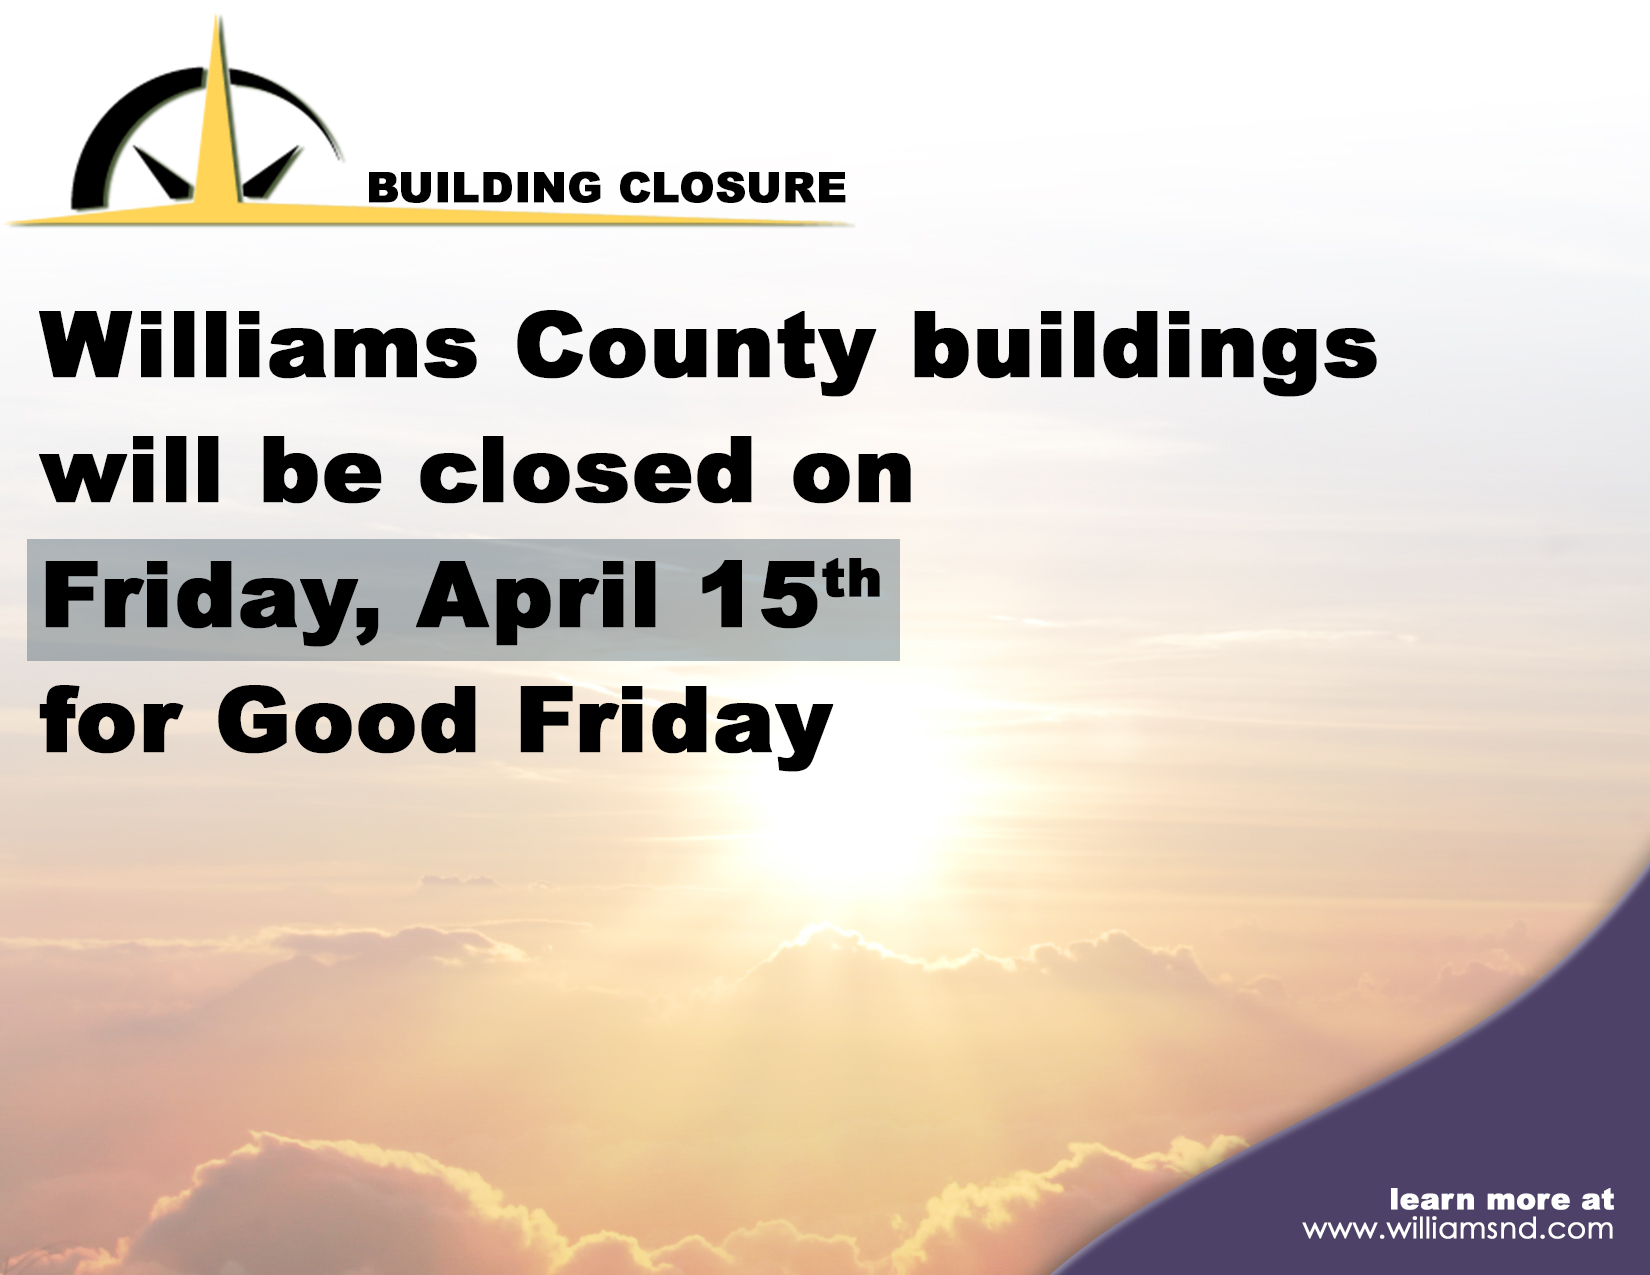 Image of a sunrise with text Williams County buildings will be closed on Friday, April 15th for Good Friday